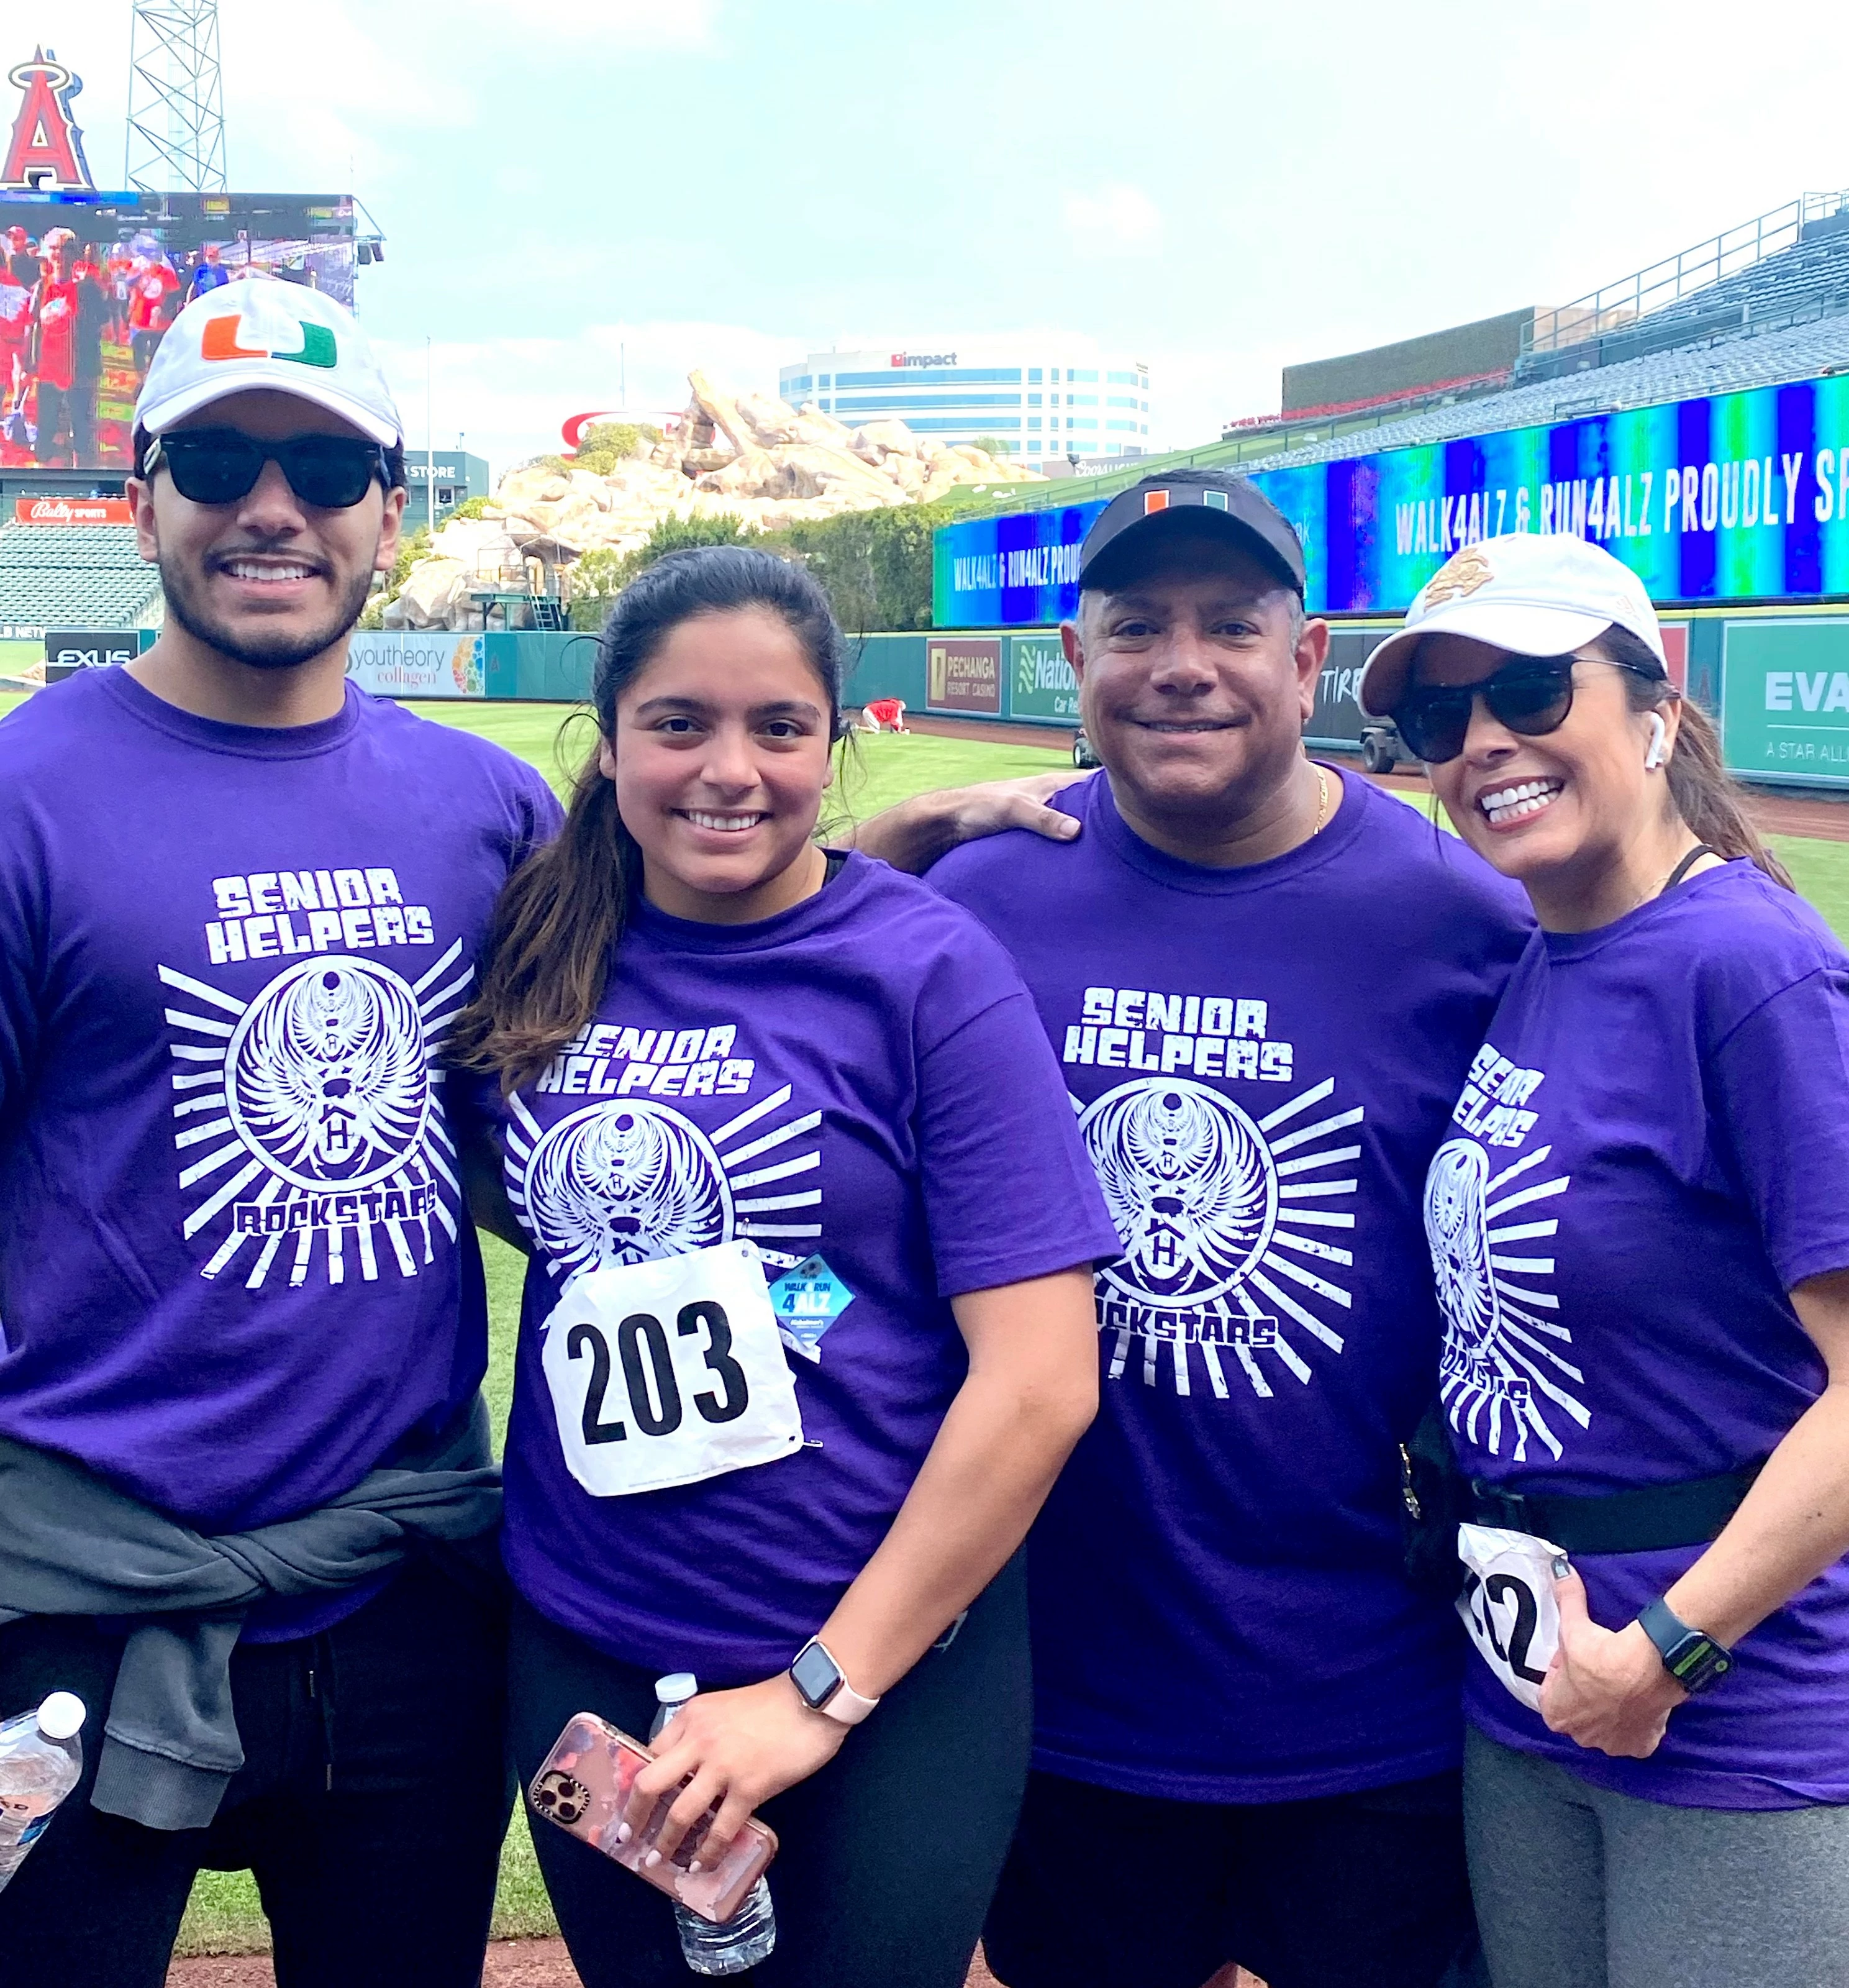 Senior Helpers was in full force with five offices representing at the Walk & Run 4ALZ, honoring several loved ones. We honored our beloved Matriarch and Nana, Angeles V. Munoz.